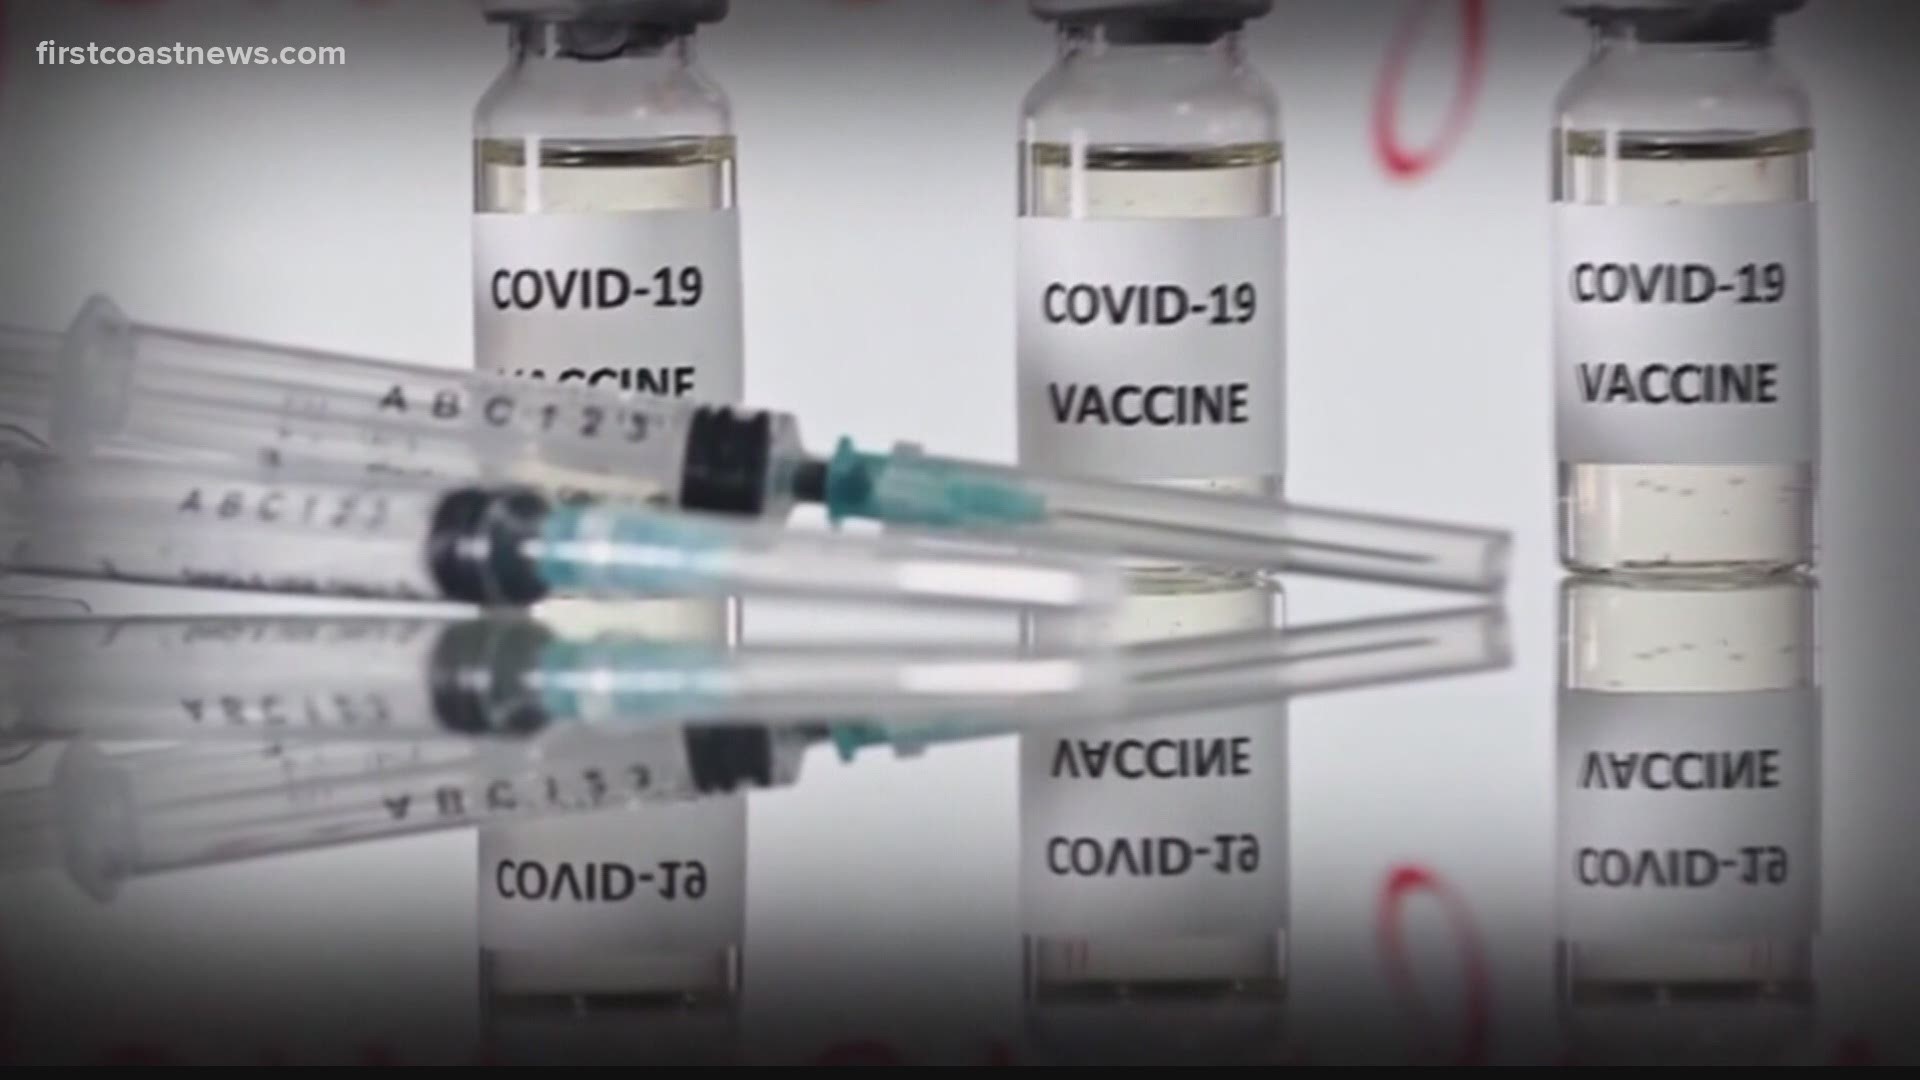 Vaccine Team: Where can teachers go to get vaccinated?